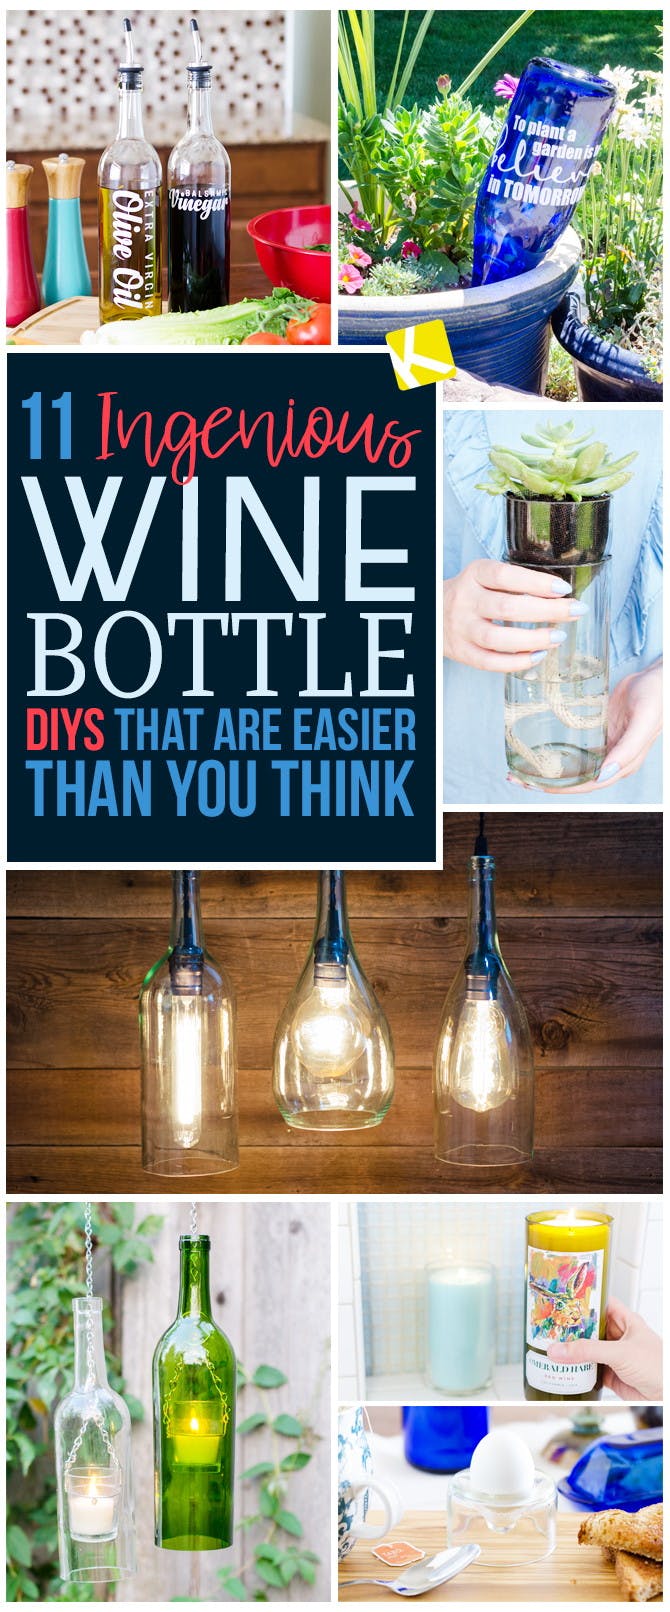 11 Ingenious Wine Bottle DIYs That Are Easier than You Think